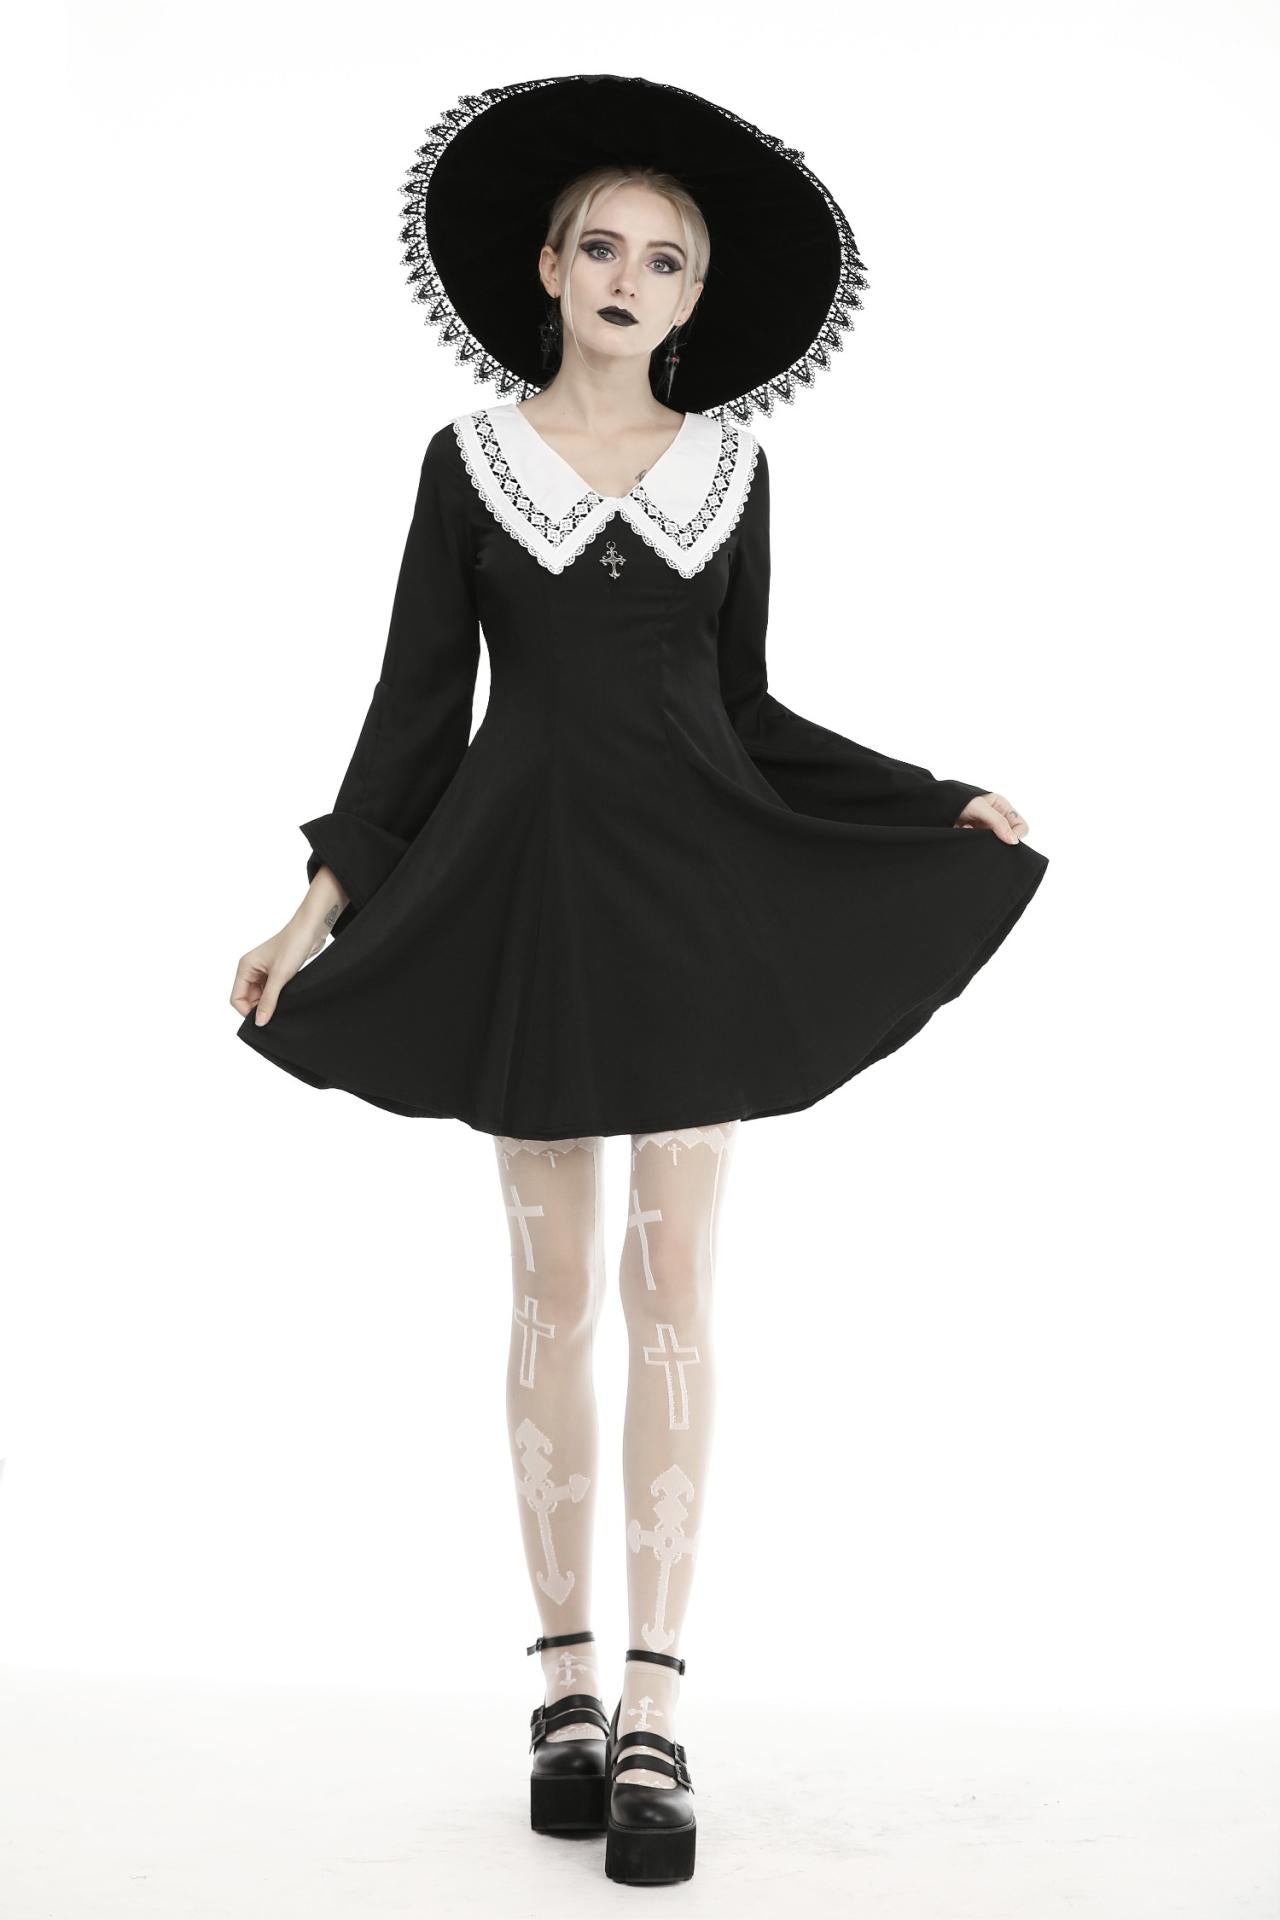 Dark in Love Annabella Dress with Cross and White Collar - Kate's Clothing